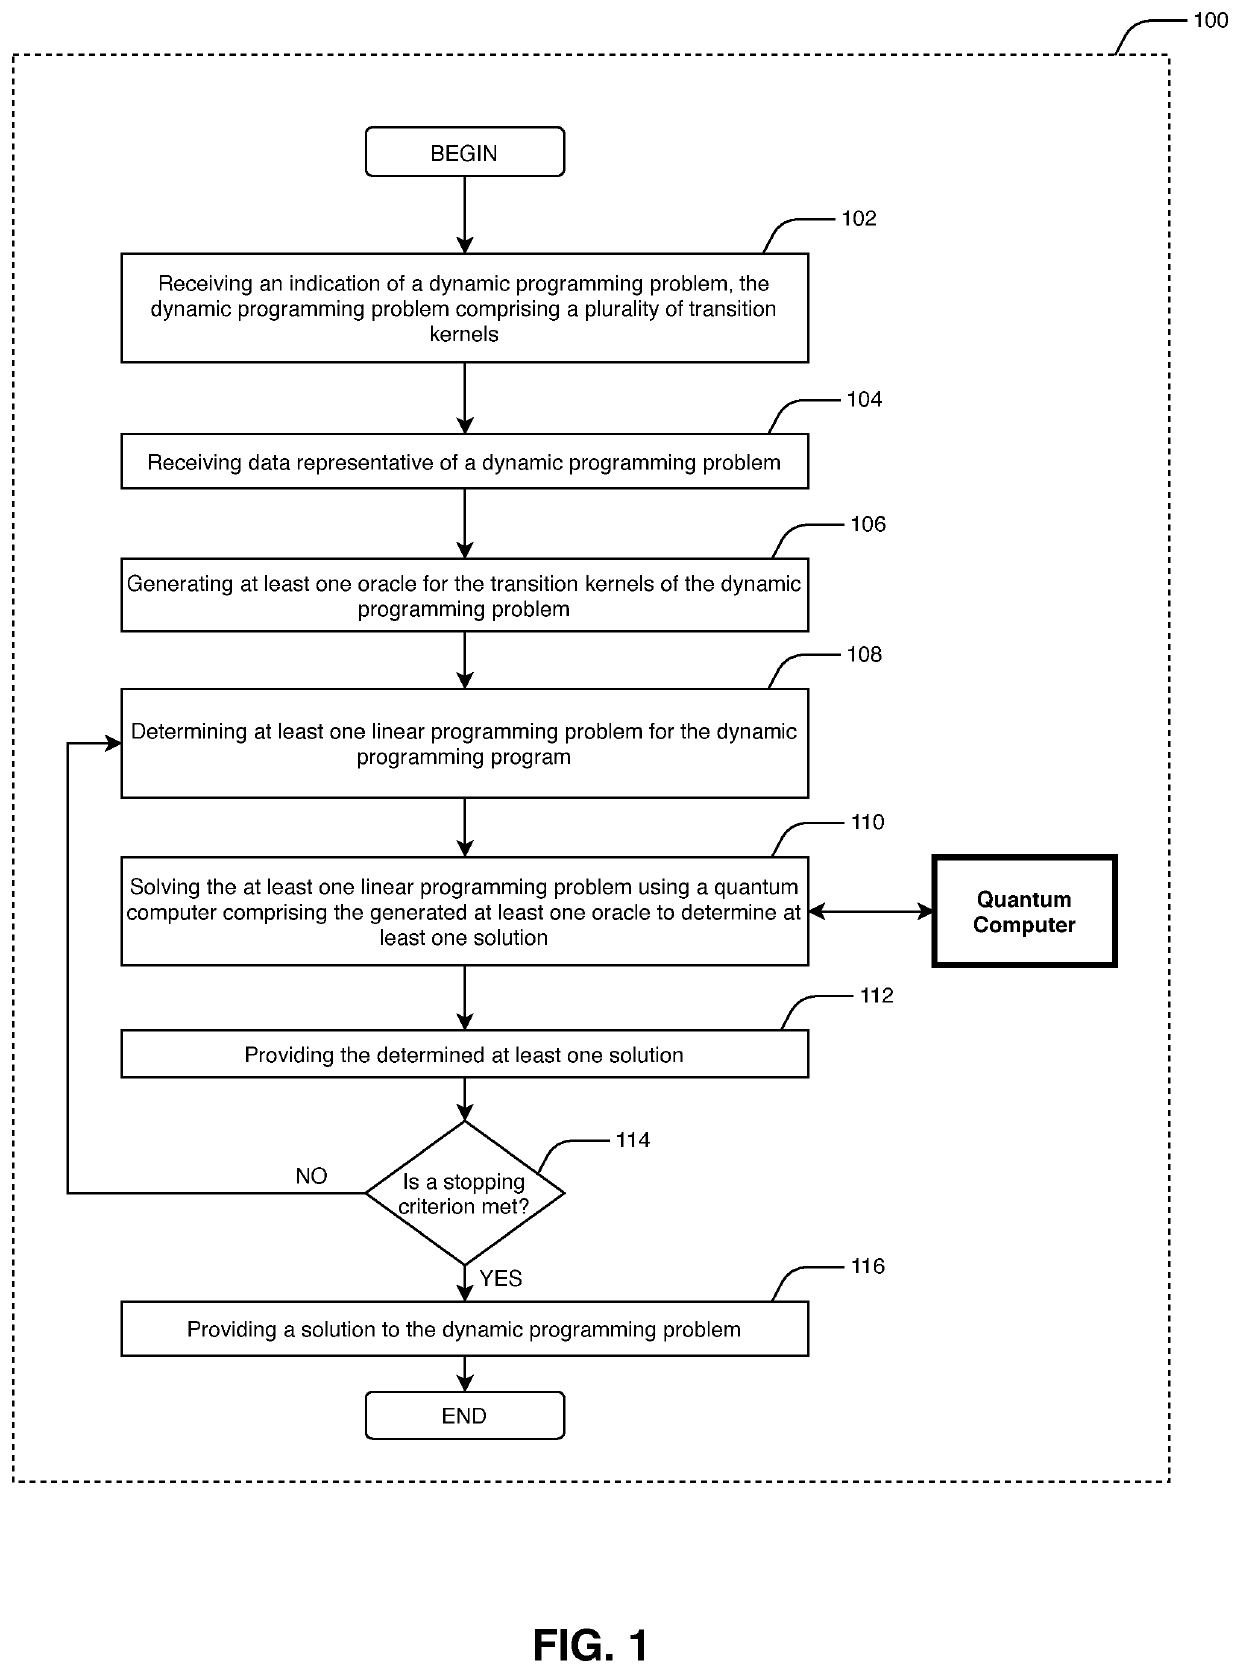 Method and system for solving a dynamic programming problem